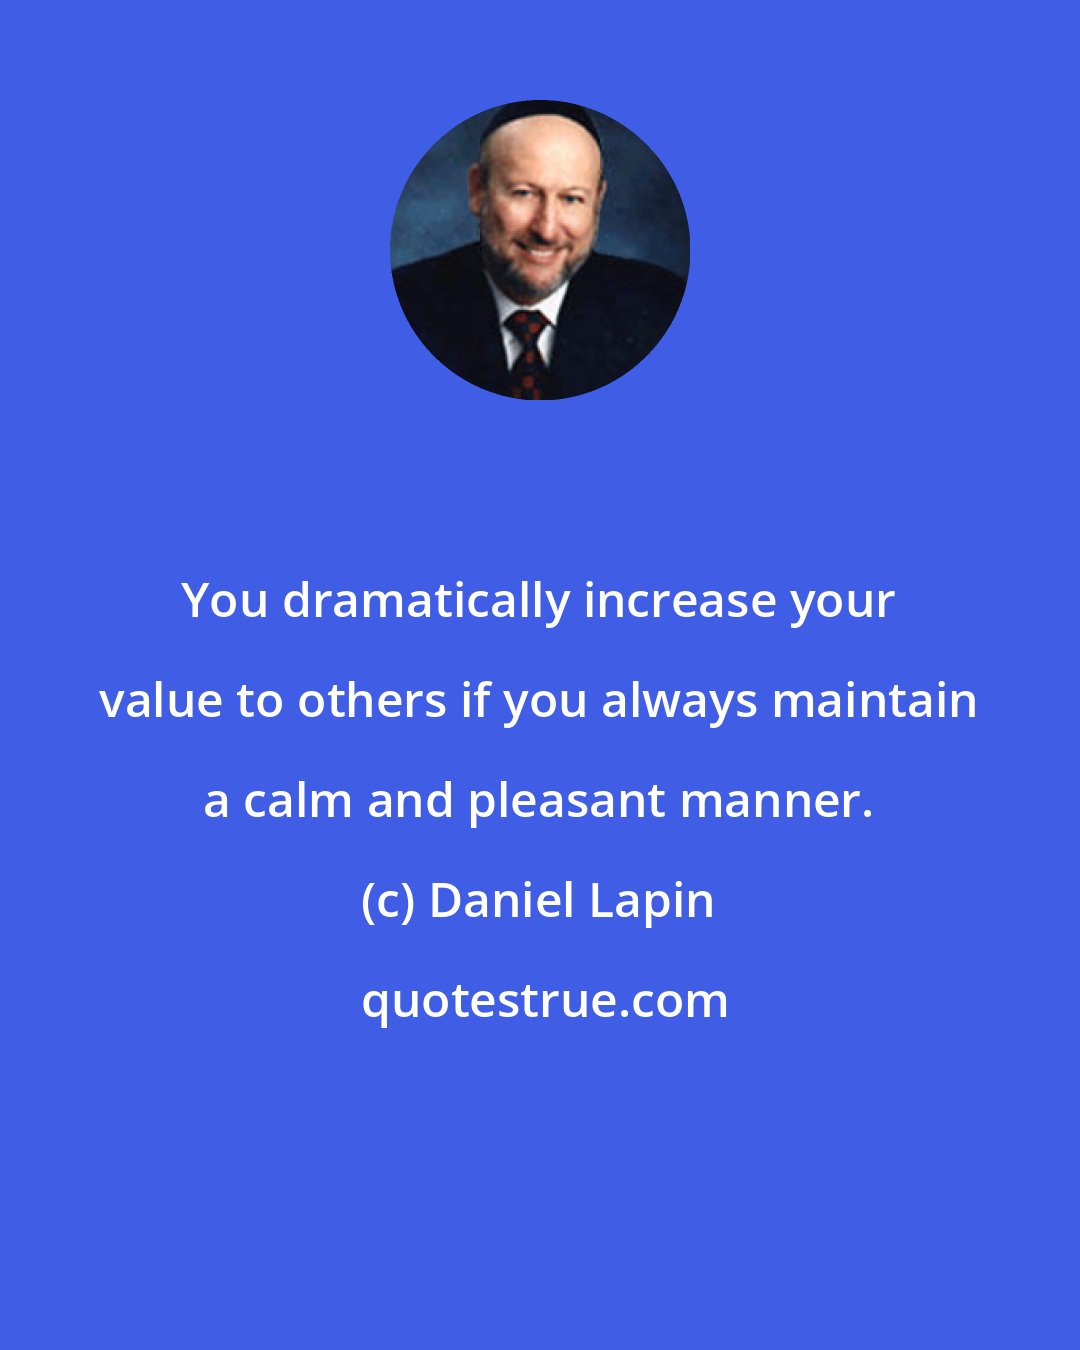 Daniel Lapin: You dramatically increase your value to others if you always maintain a calm and pleasant manner.